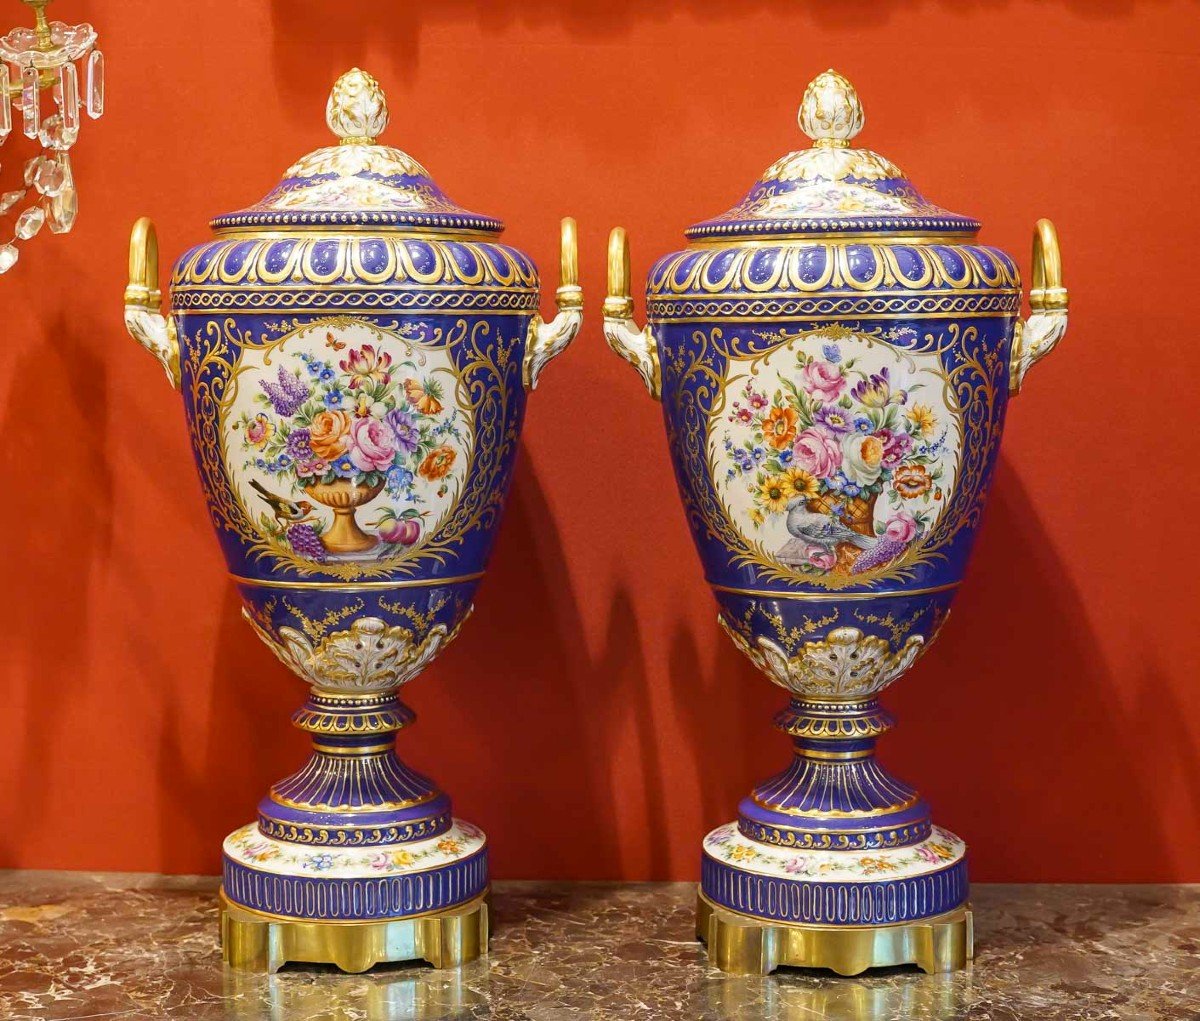 Le Tallec "pair Of Very Large Covered Sèvres Blue Pots" With 18th Century Flower Patterns